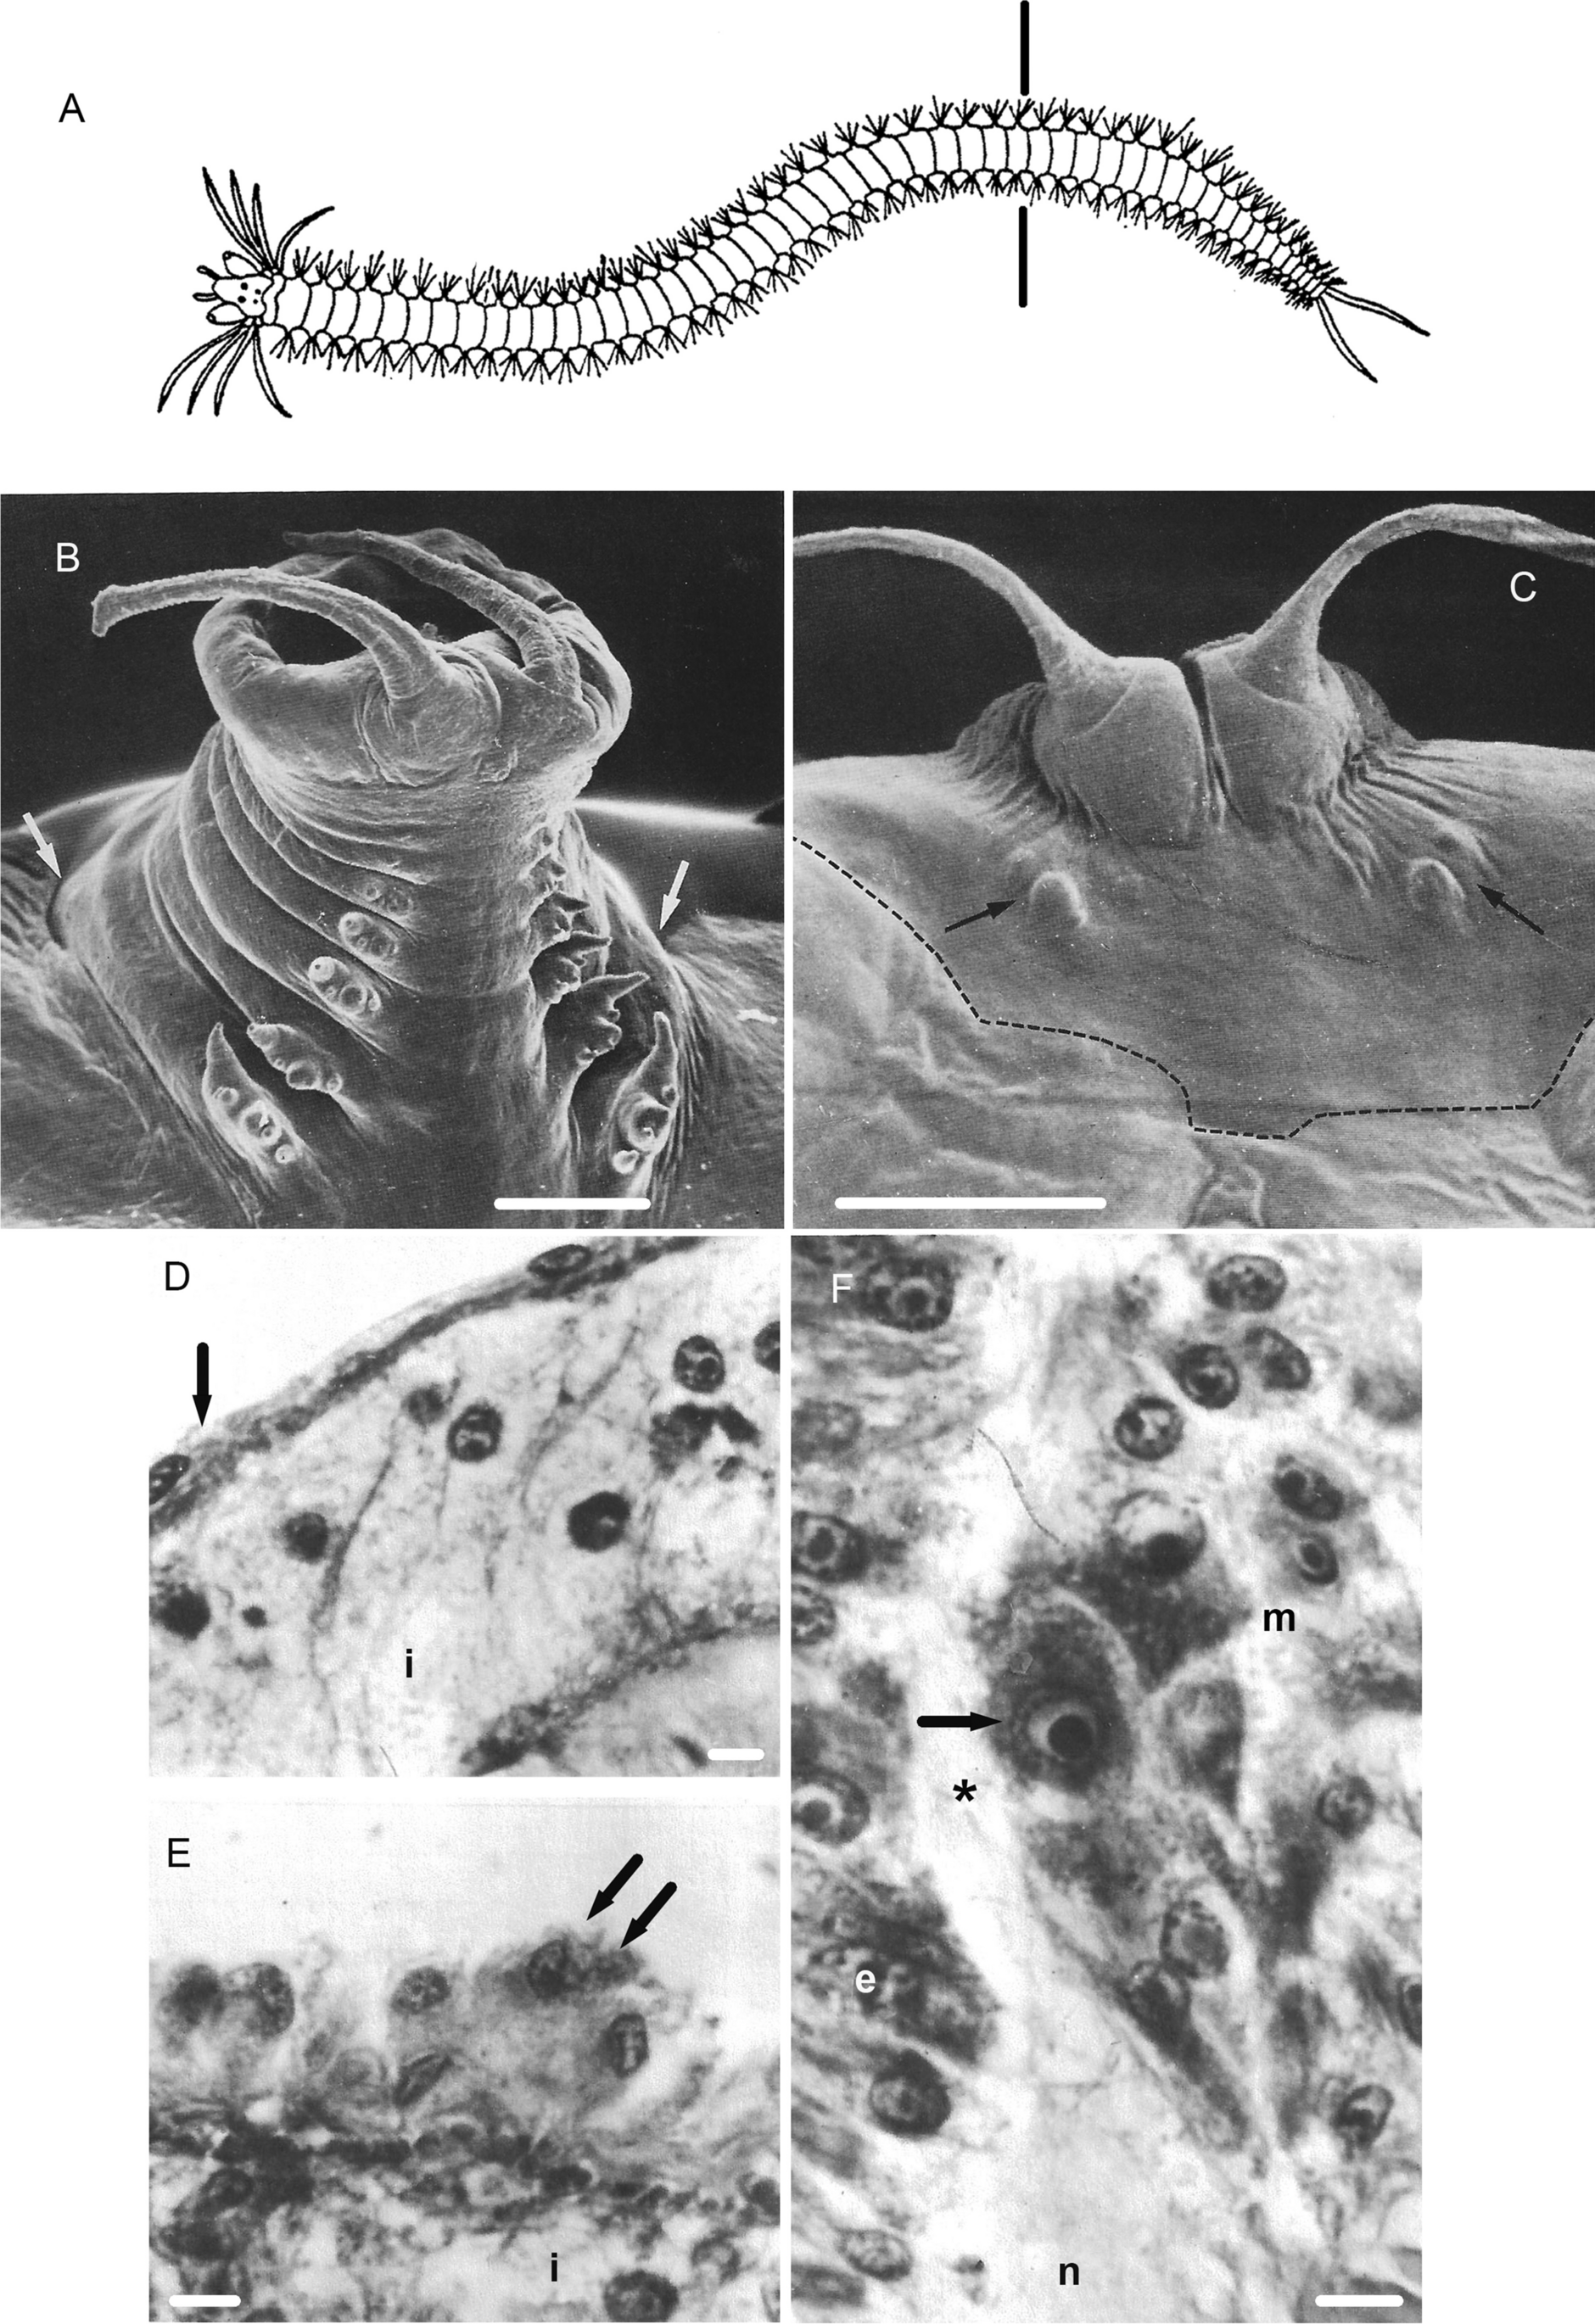 Nerves and availability of mesodermal cells are essential for the function of the segment addition zone (SAZ) during segment regeneration in polychaete annelids